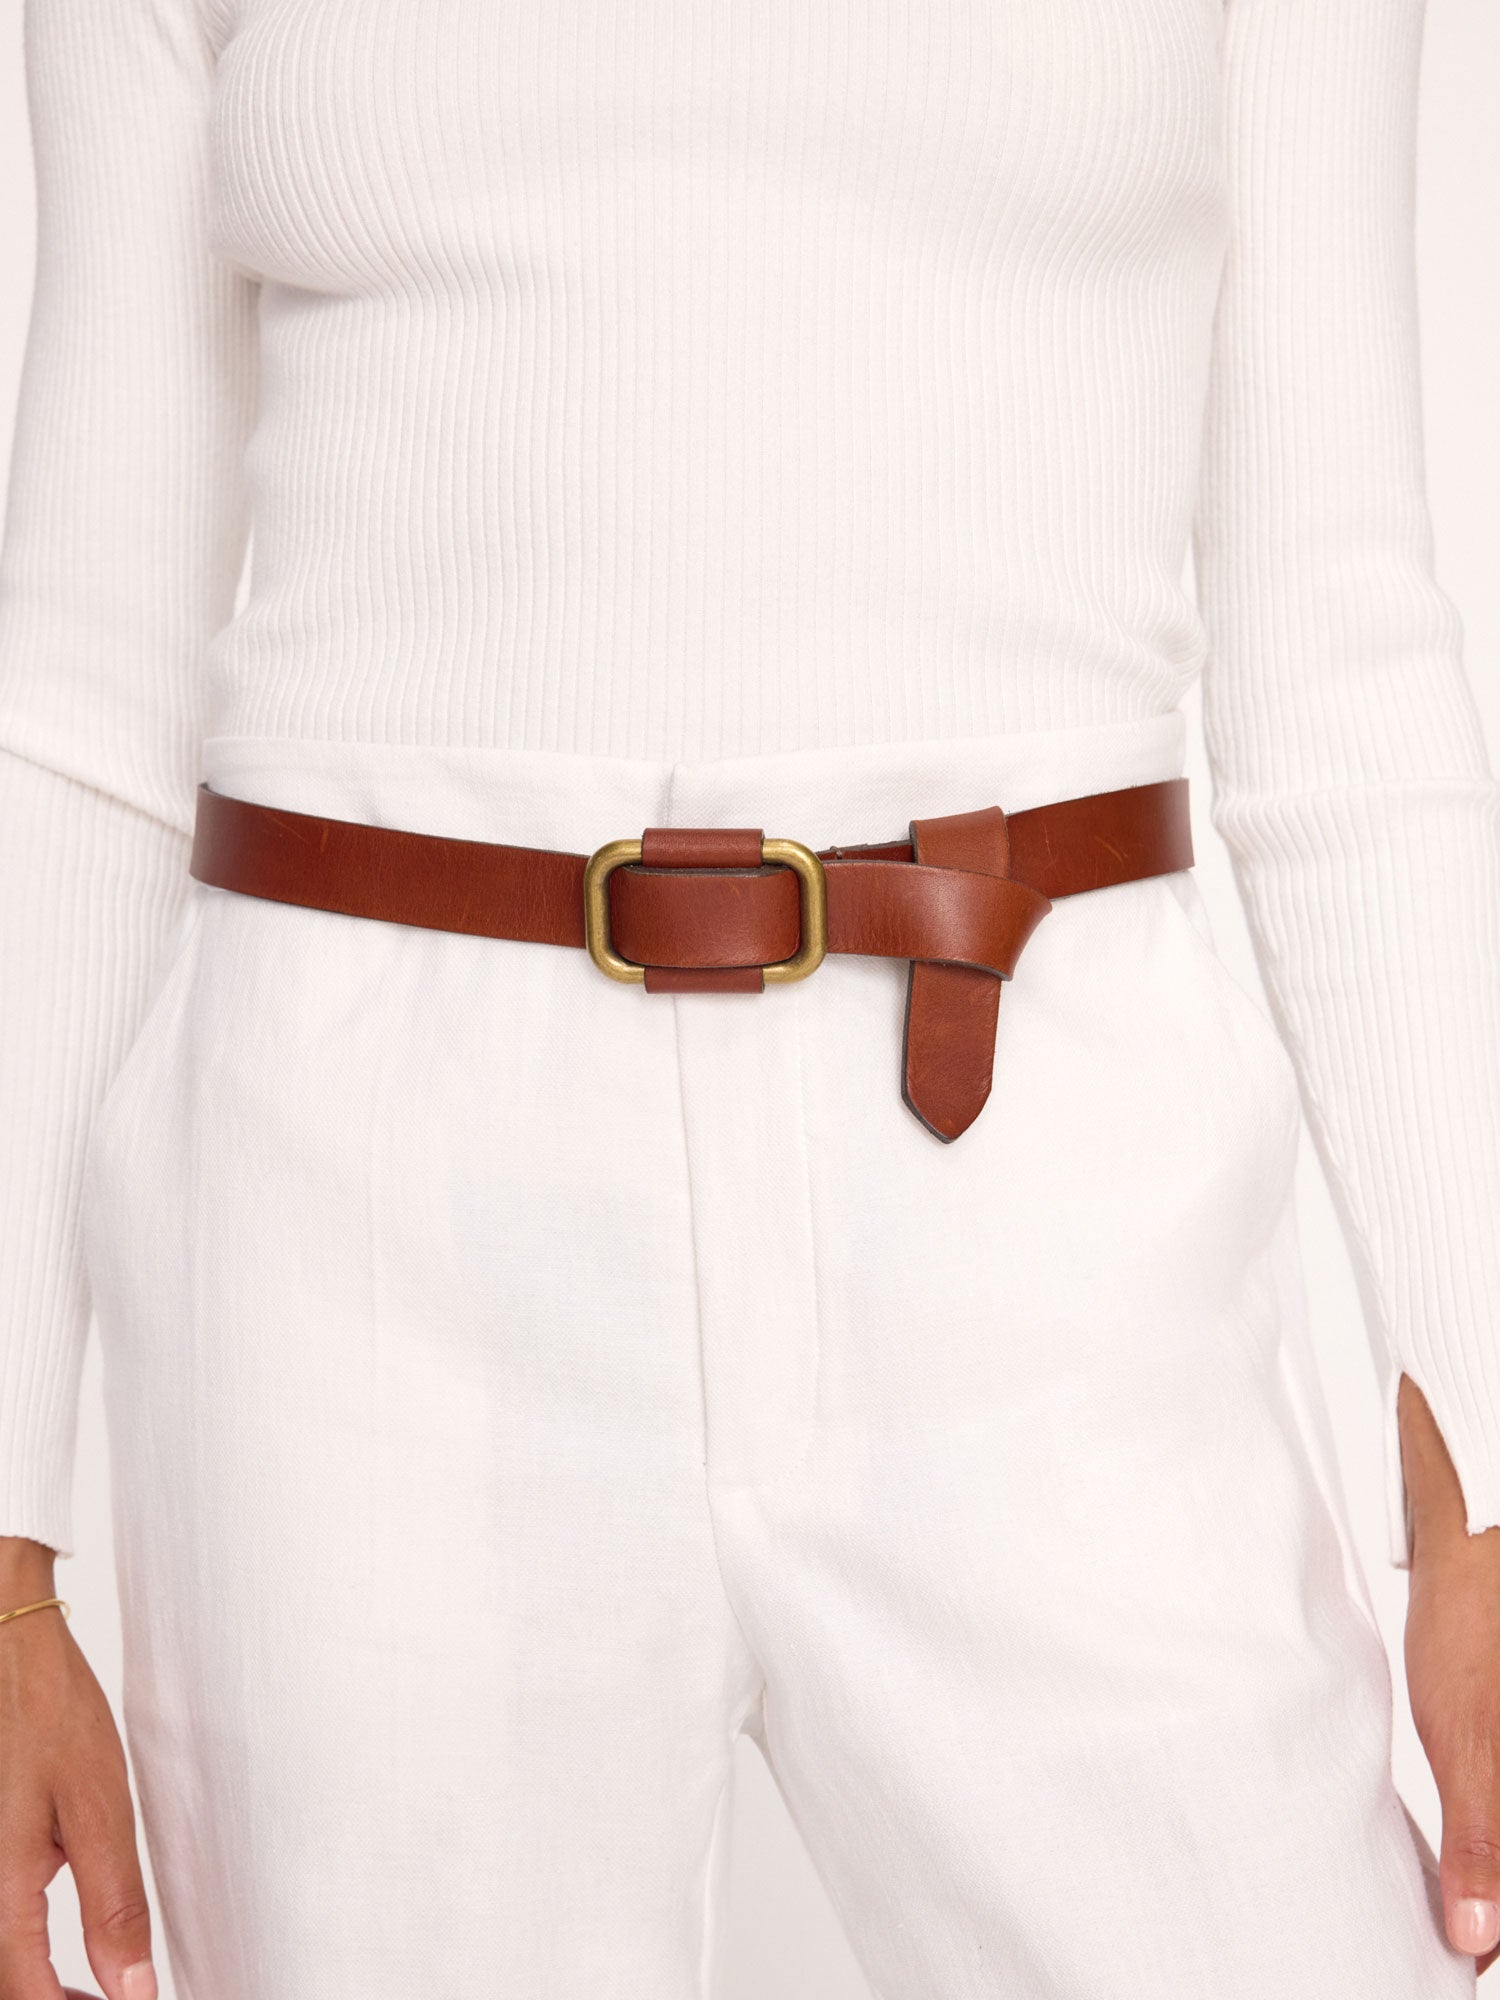 Saddle brown leather buckle belt full view 2 